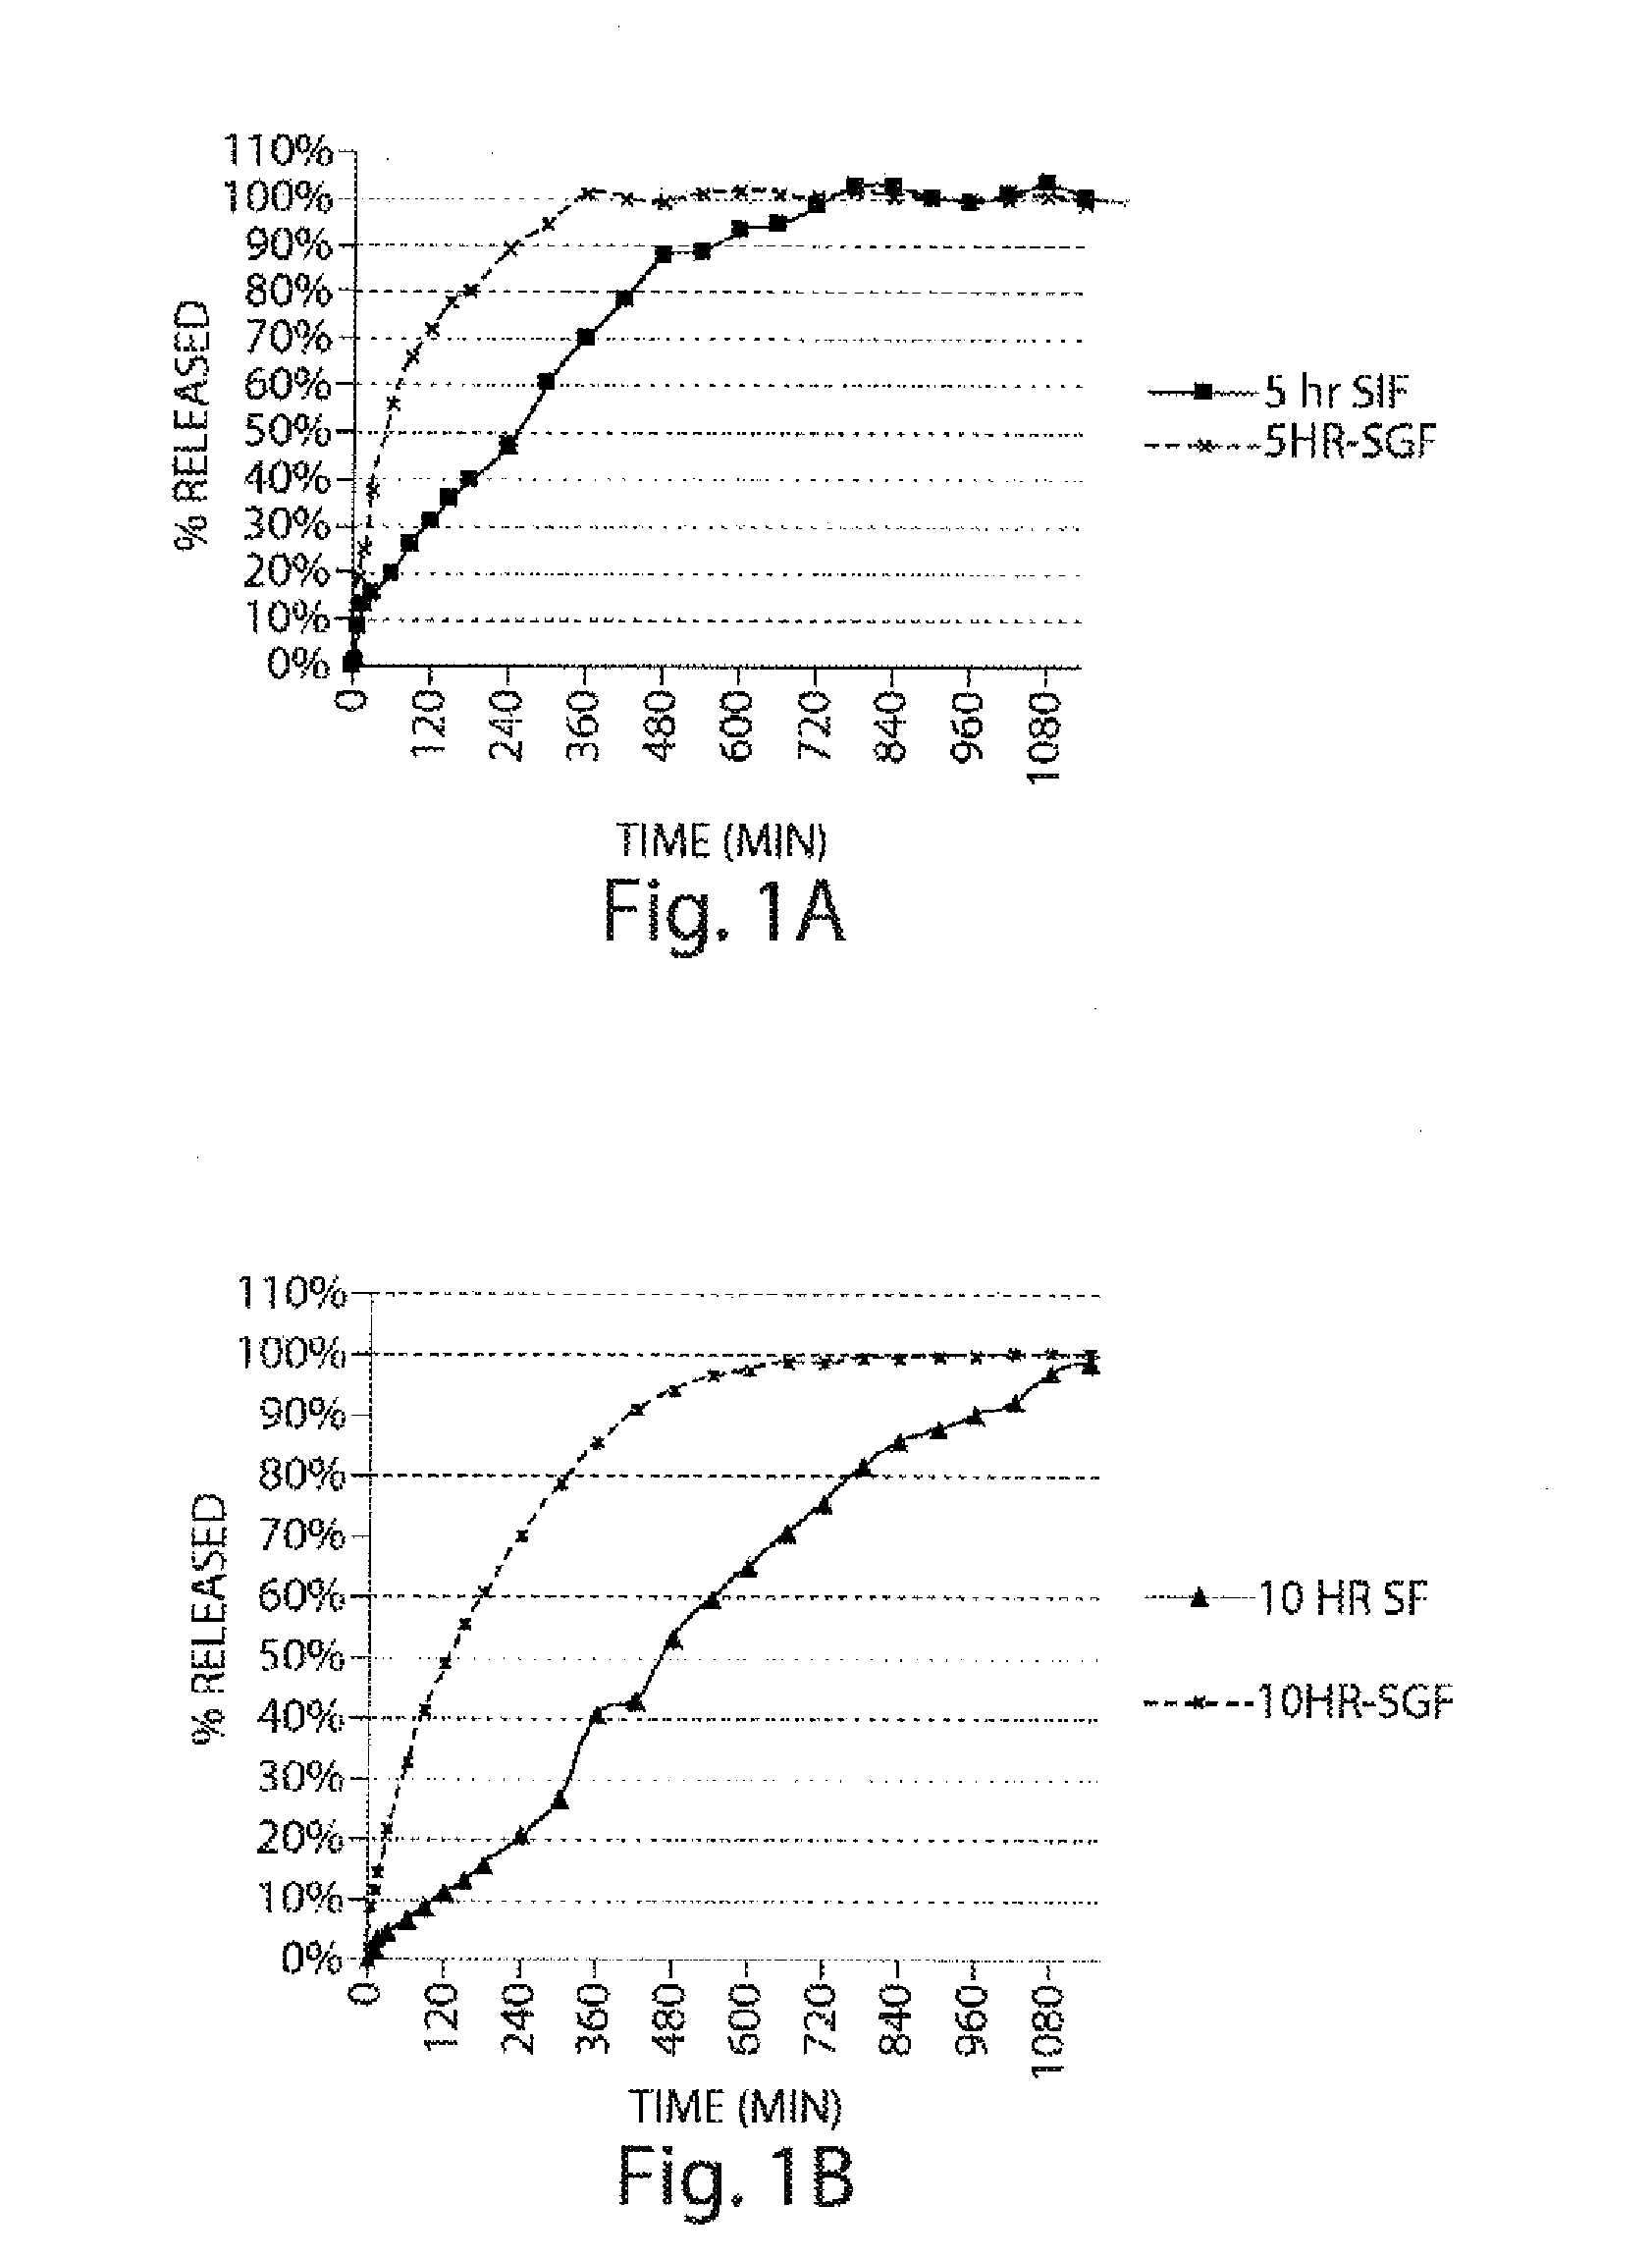 Pharmaceutical Compositions Of Metabotropic Glutamate 5 Receptor (MGLU5) Antagonists